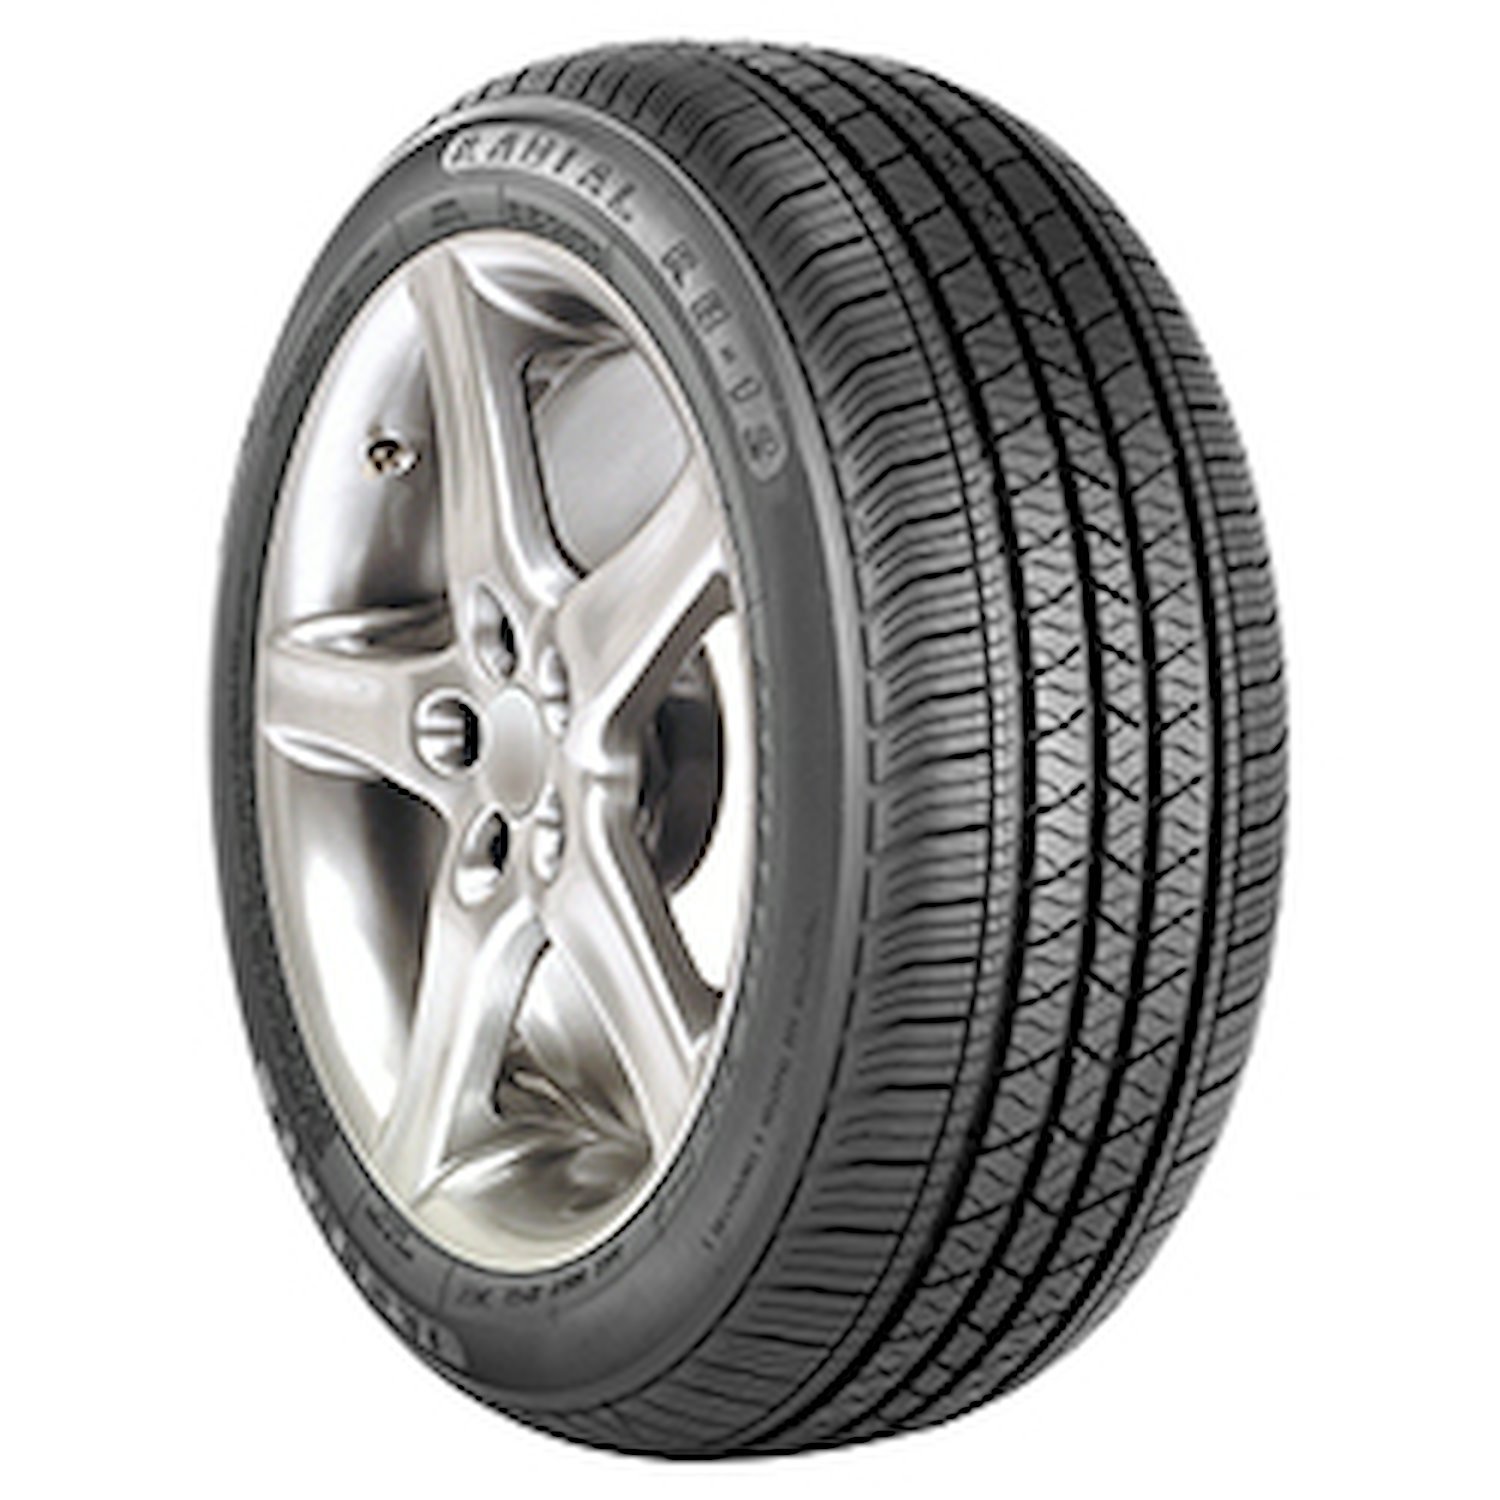 RB-12 Tire, 205/55R16 91T